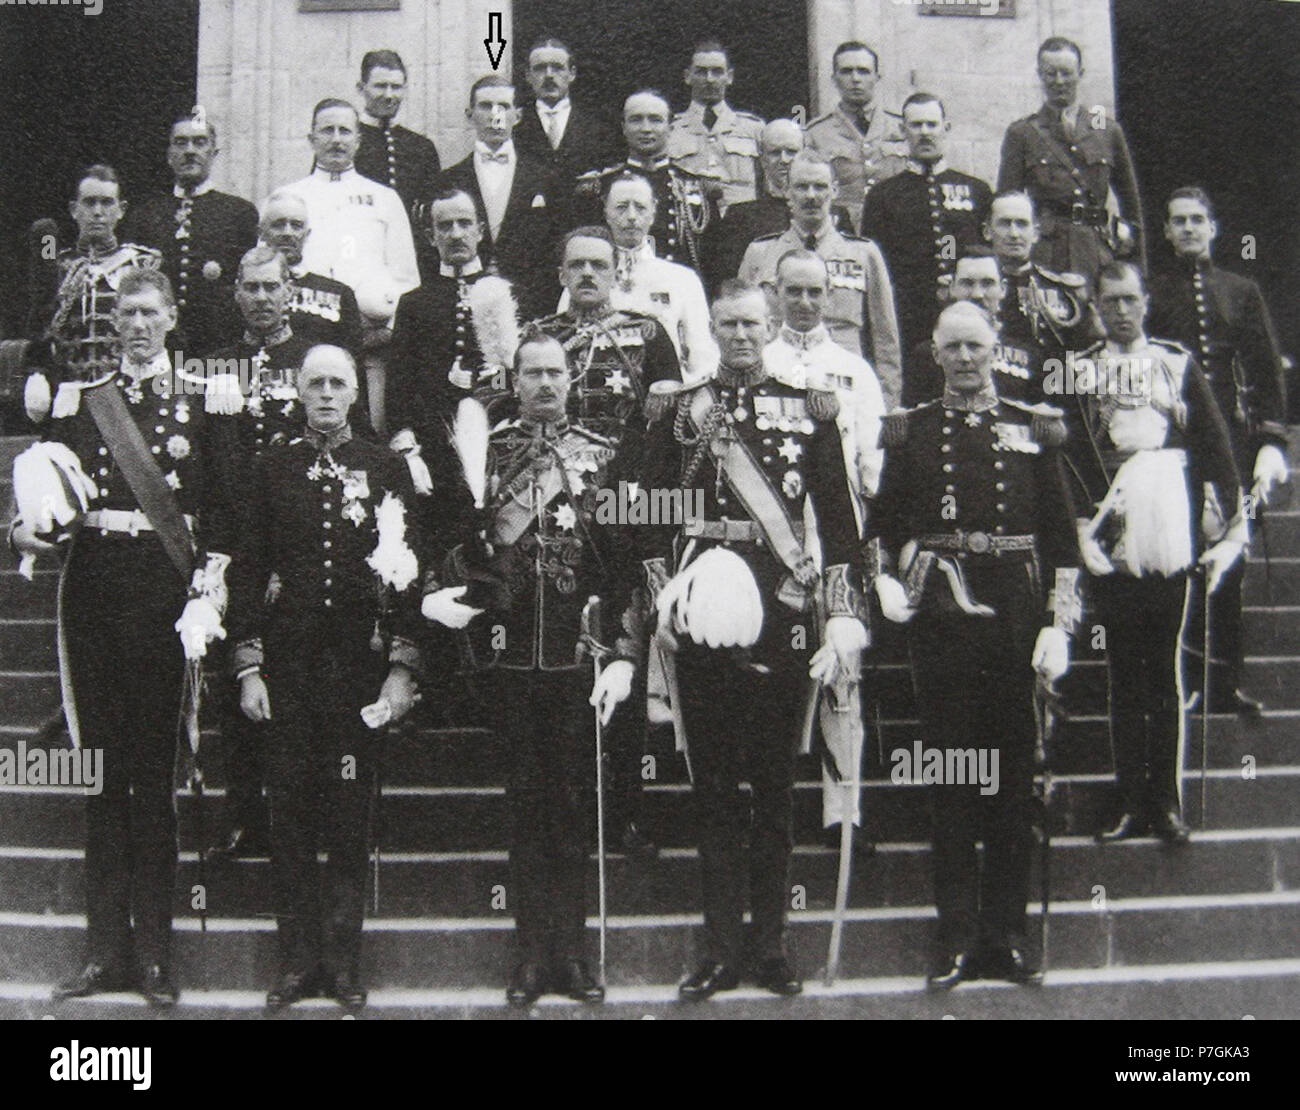 English: Photograph showing the members of the delegation sent to represent the British government at the coronation of Haile Selassie as emperor of Ethiopia in 1930. The delegates are standing on the steps of the British Legation in Addis Ababa. Front row, from left to right: Sir H. Kittermaster, Governor of Somaliland; Sir S. Barton, Minister (ambassador) to Addis Abeba; the Duke of Gloucester, Head of the delegation; Sir J. Maffey, Governor-General of the Sudan; Admiral Fullerton, East Indies Station, Royal Navy. Standing behind Kittermaster and Barton is the Resident of Aden, Sir Stewart S Stock Photo